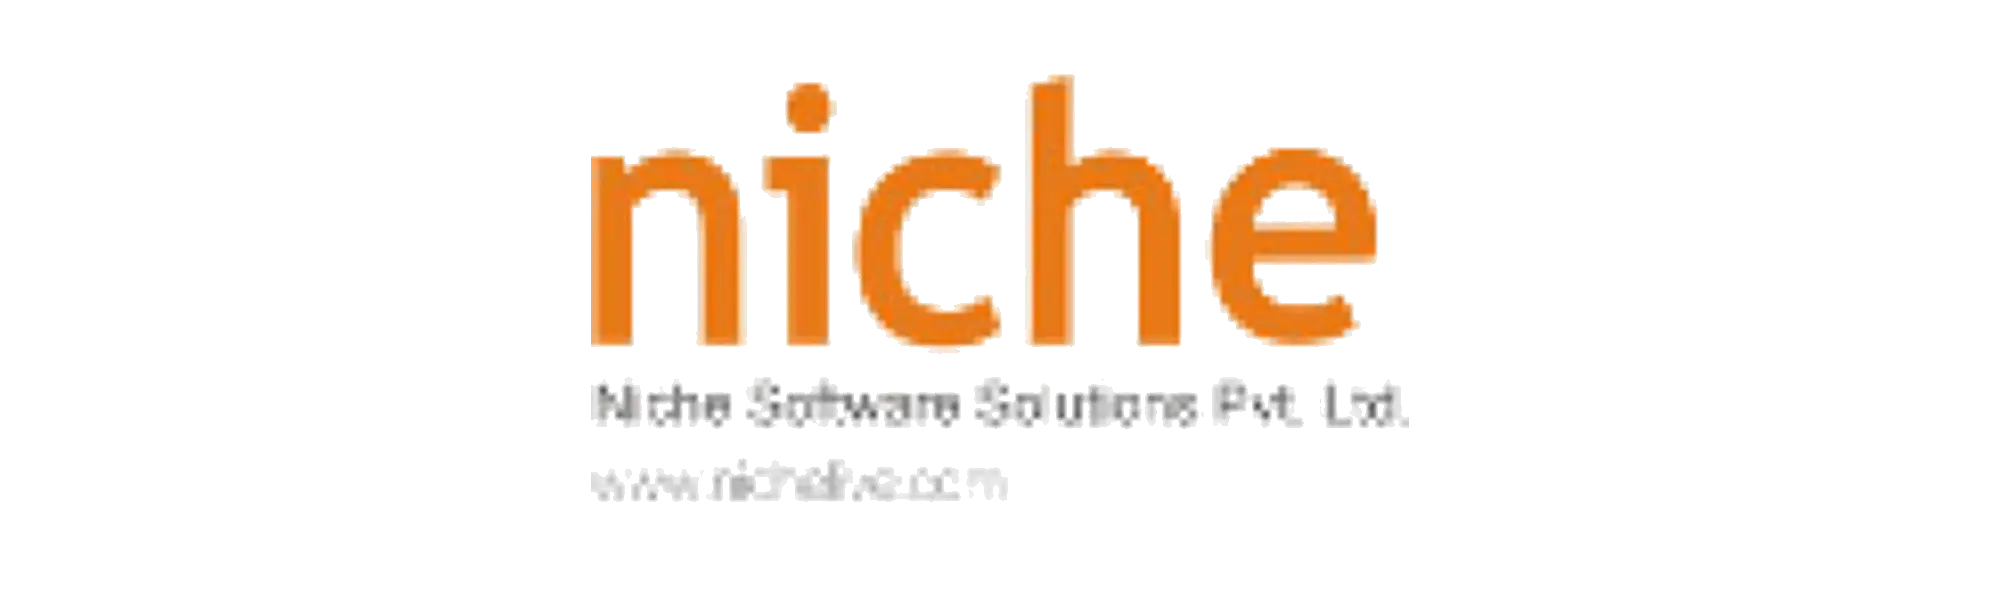 Niche Software Solutions